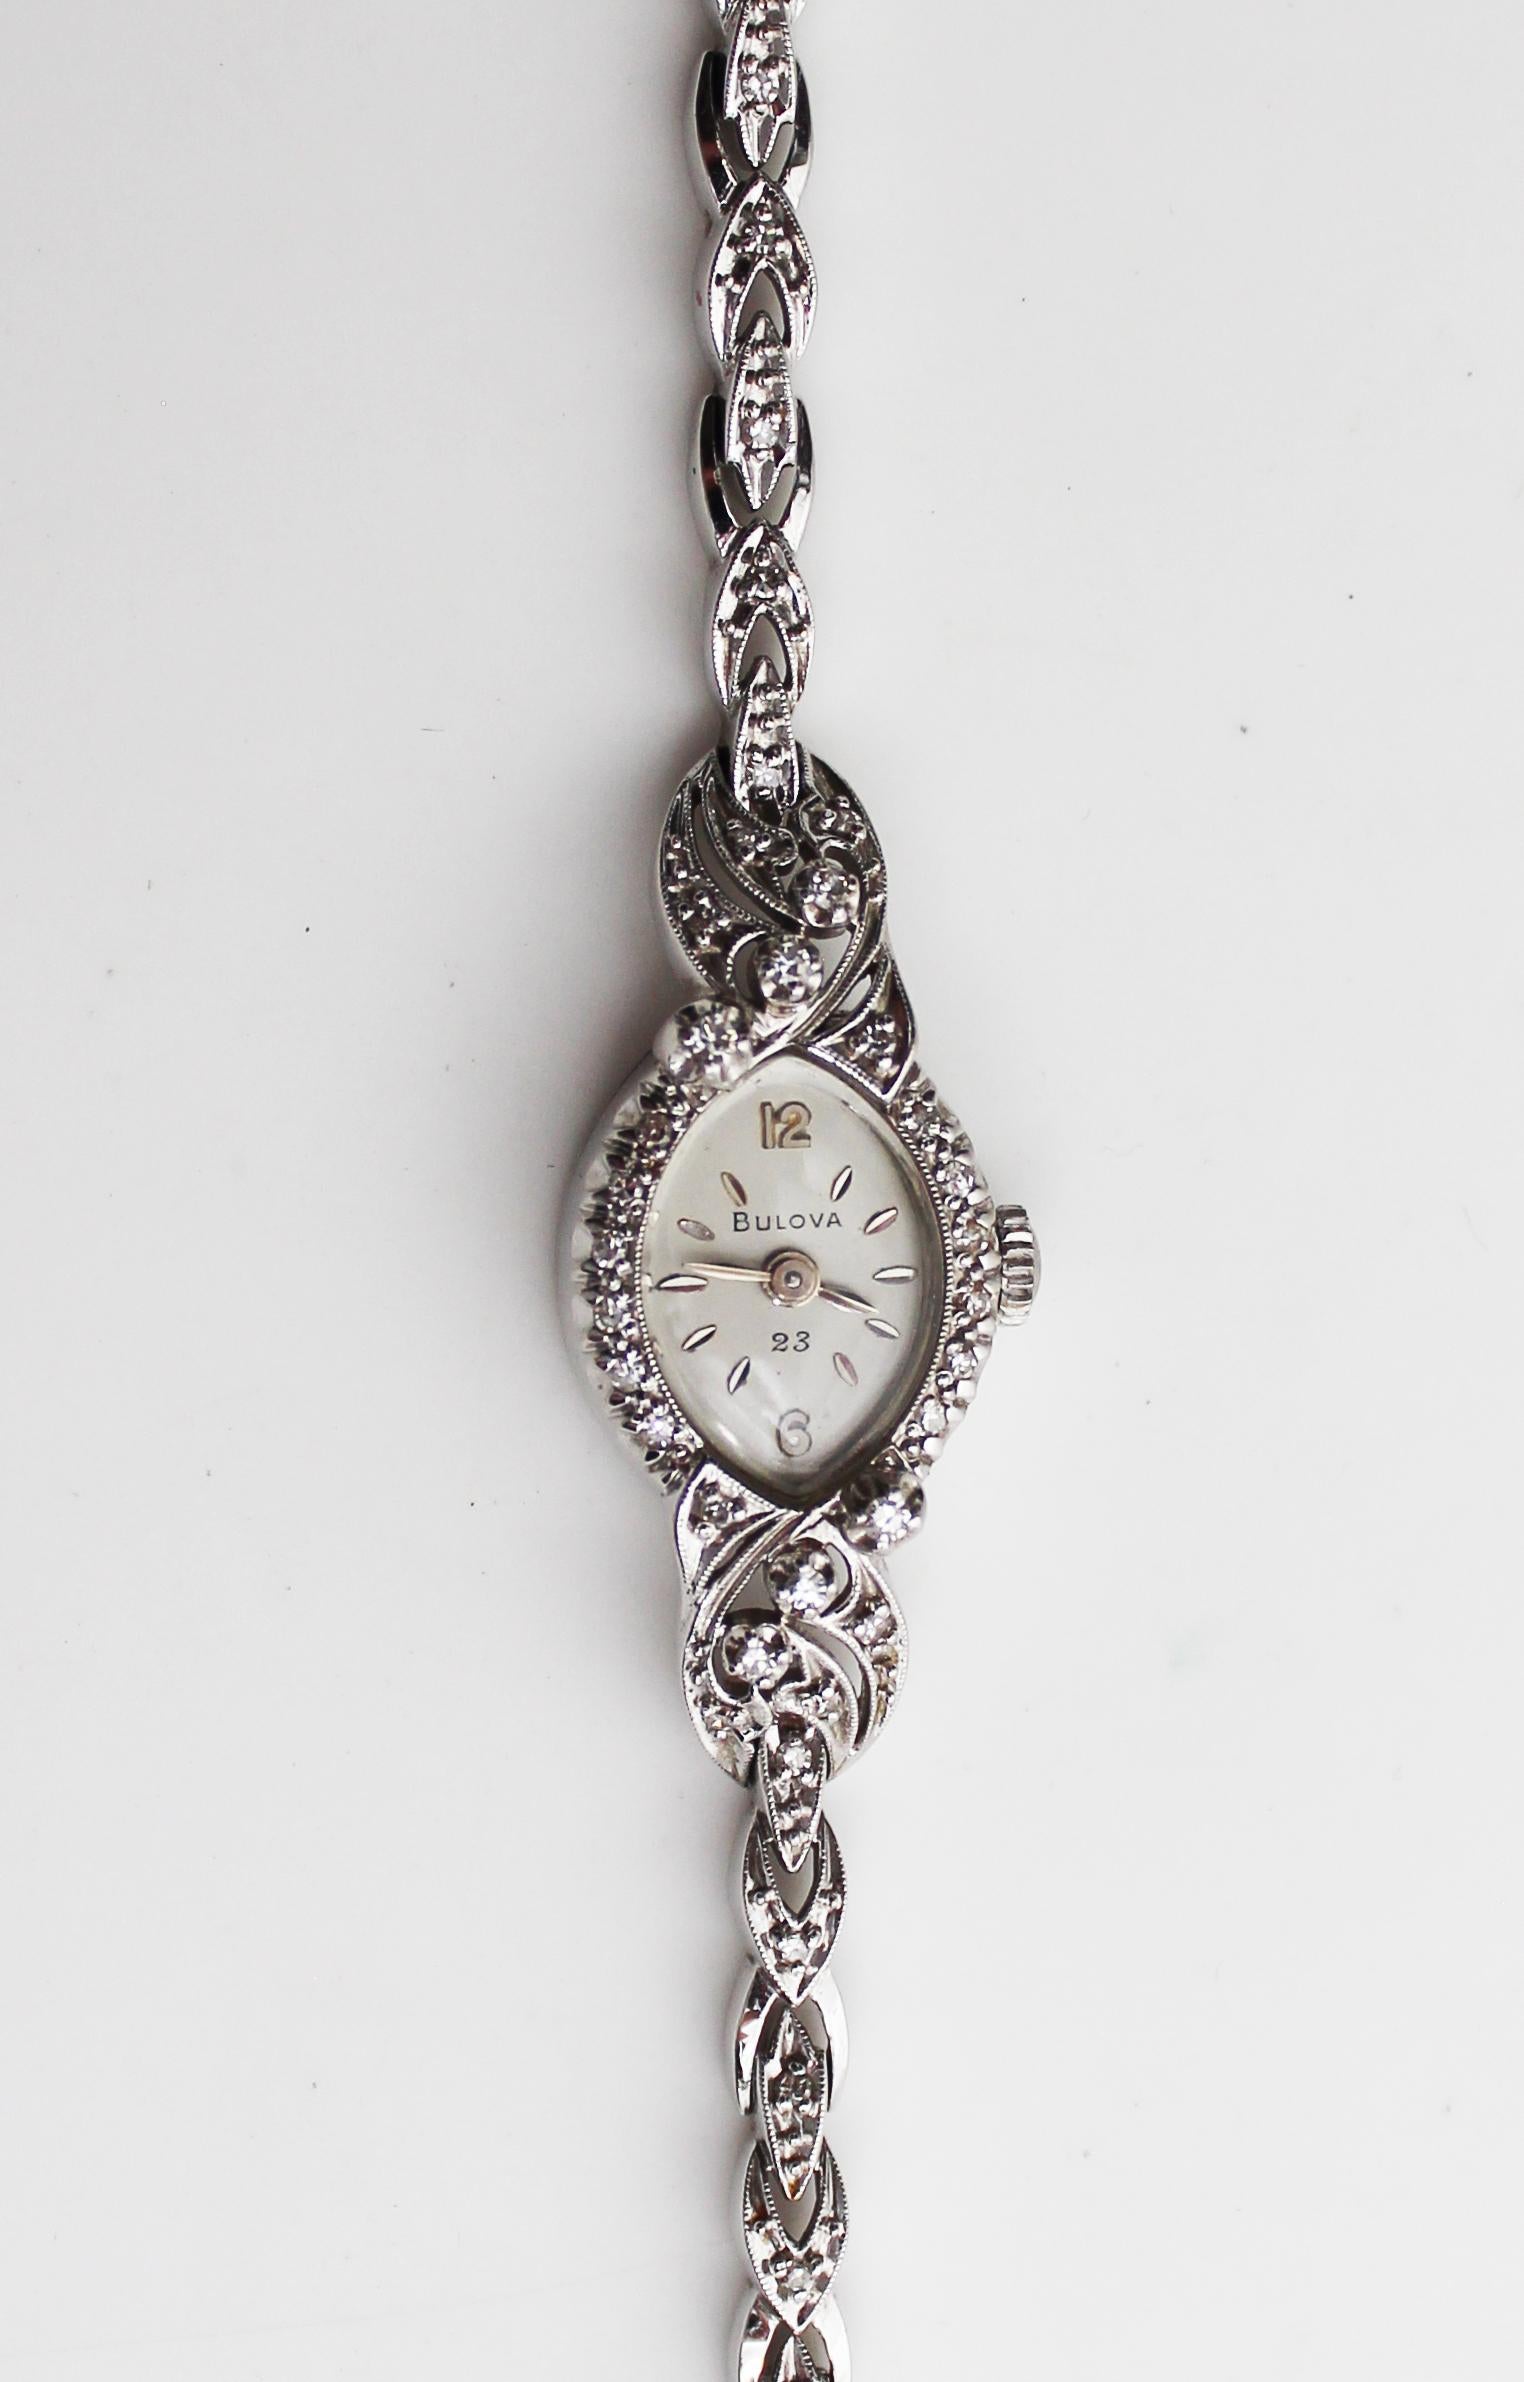 This is a gorgeous mid-century Bulova watch in 14k white gold set with diamonds and featuring a rope strap. The case is an elegant oval shape with a diamond frame featuring ‘shoulders’ that are set with lovely diamonds! The strap is a flexible